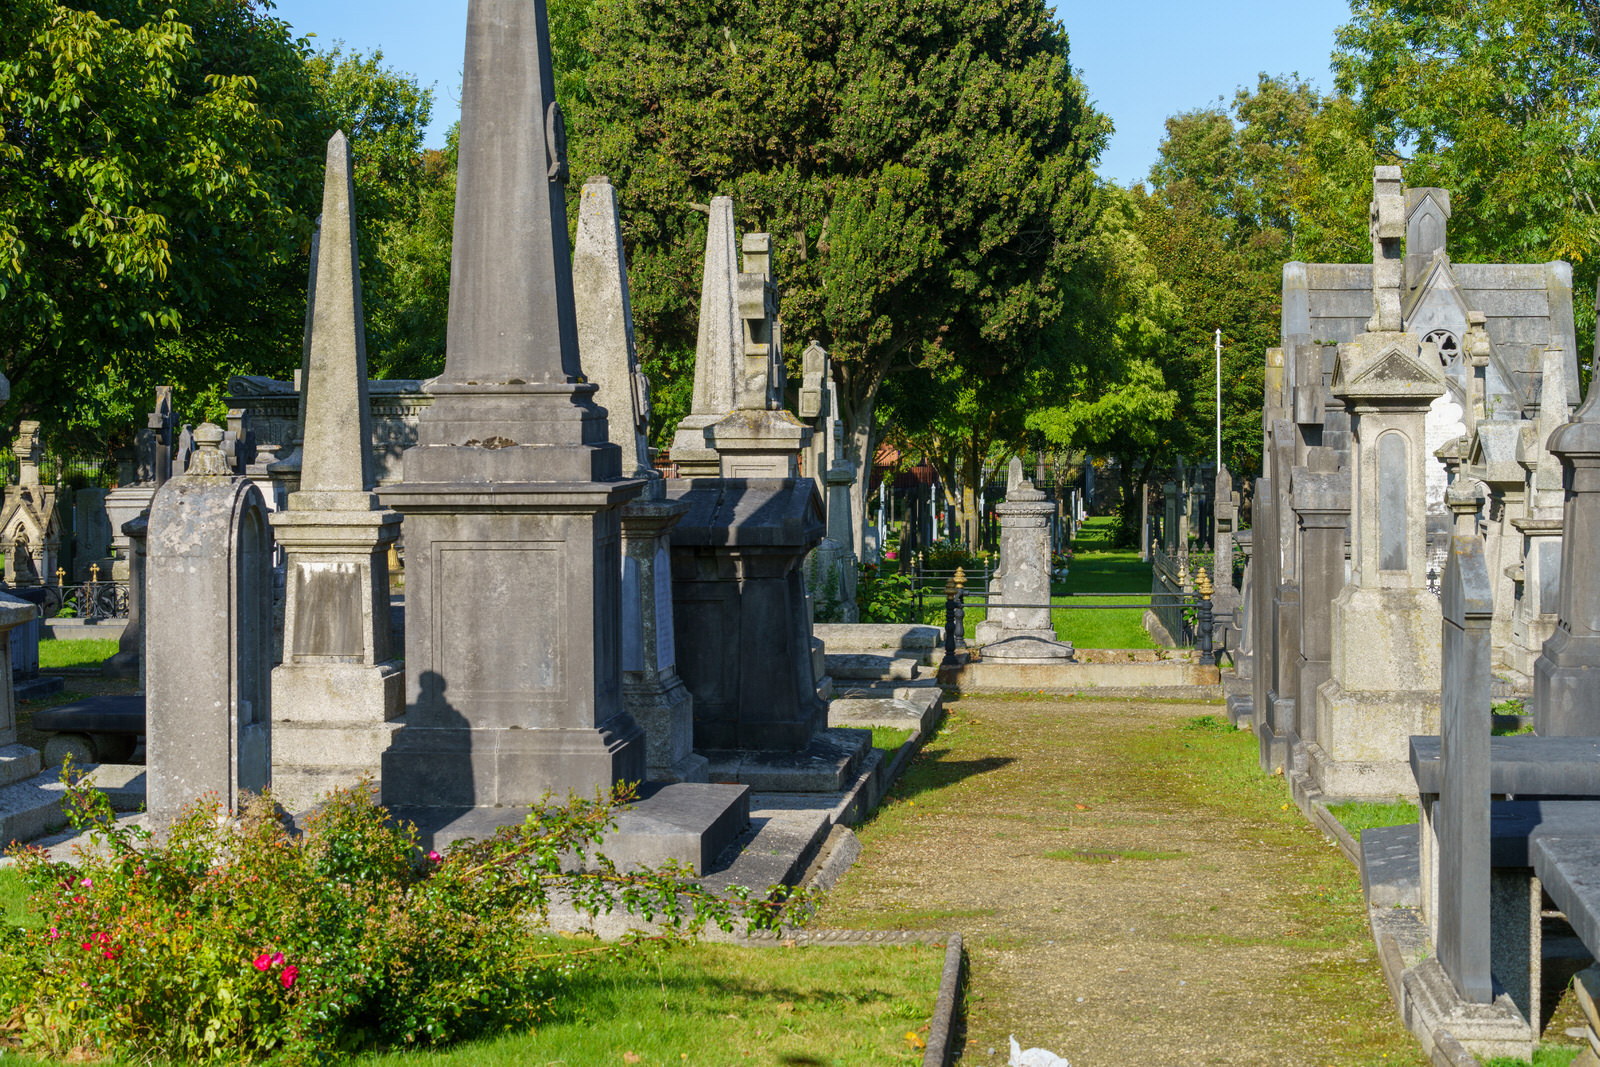 THE OLDER SECTION OF GLASNEVIN CEMETERY [I USED A SONY 70-200MM GM LENS] 011